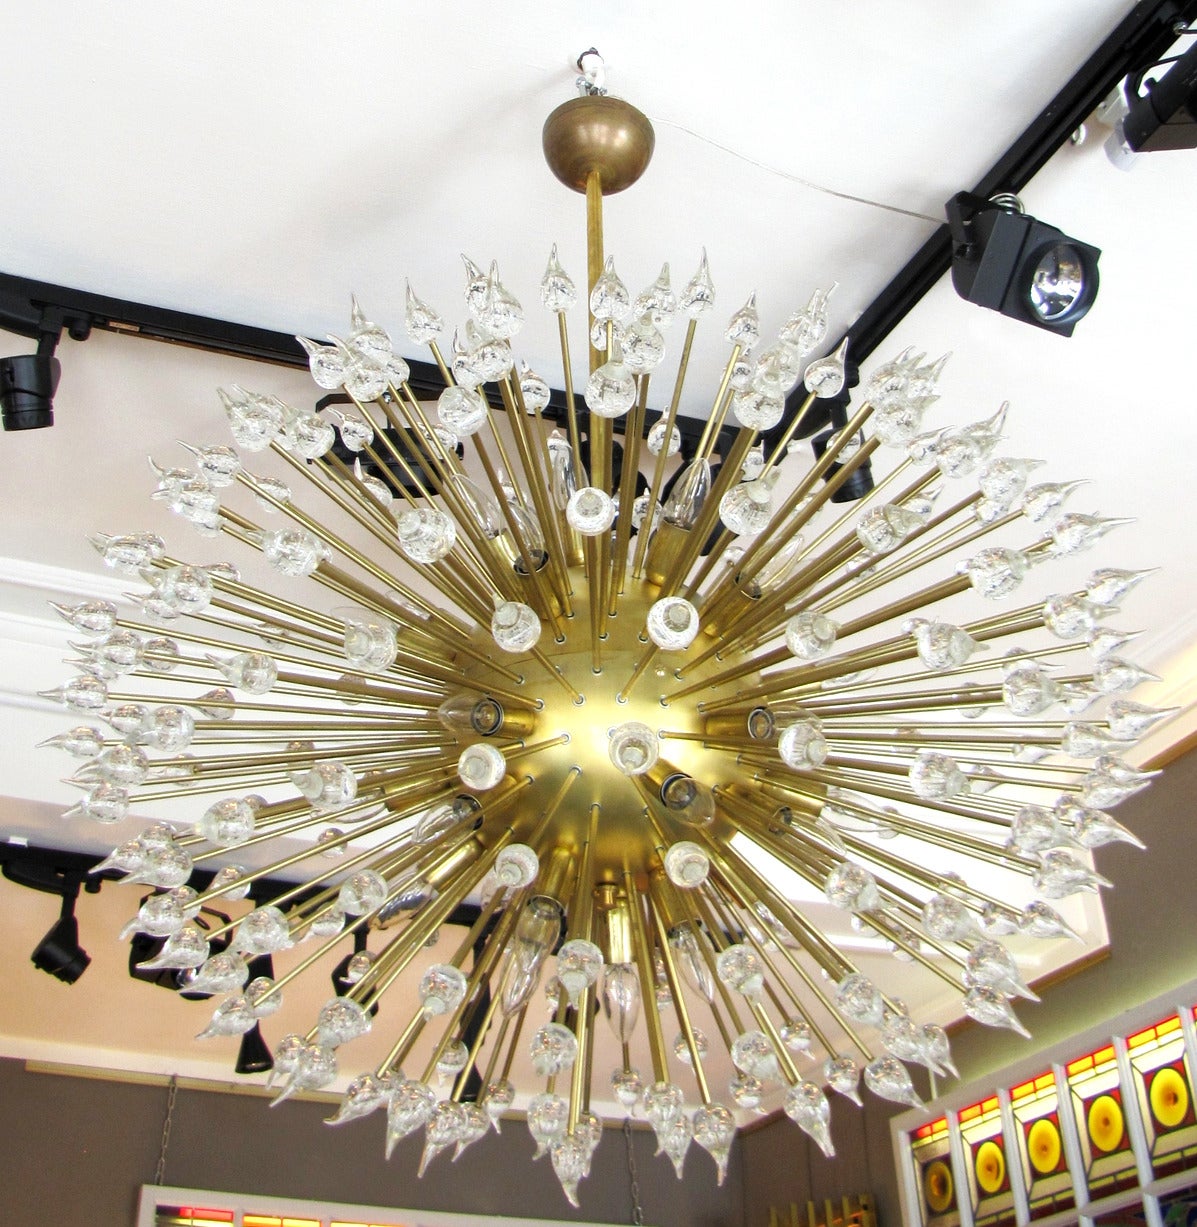 Large chandelier, all in polished brass; the rods are terminated by pretty drops glass with bubbles, that reflect and magnify the light of the small bulbs. Italy circa 1980.